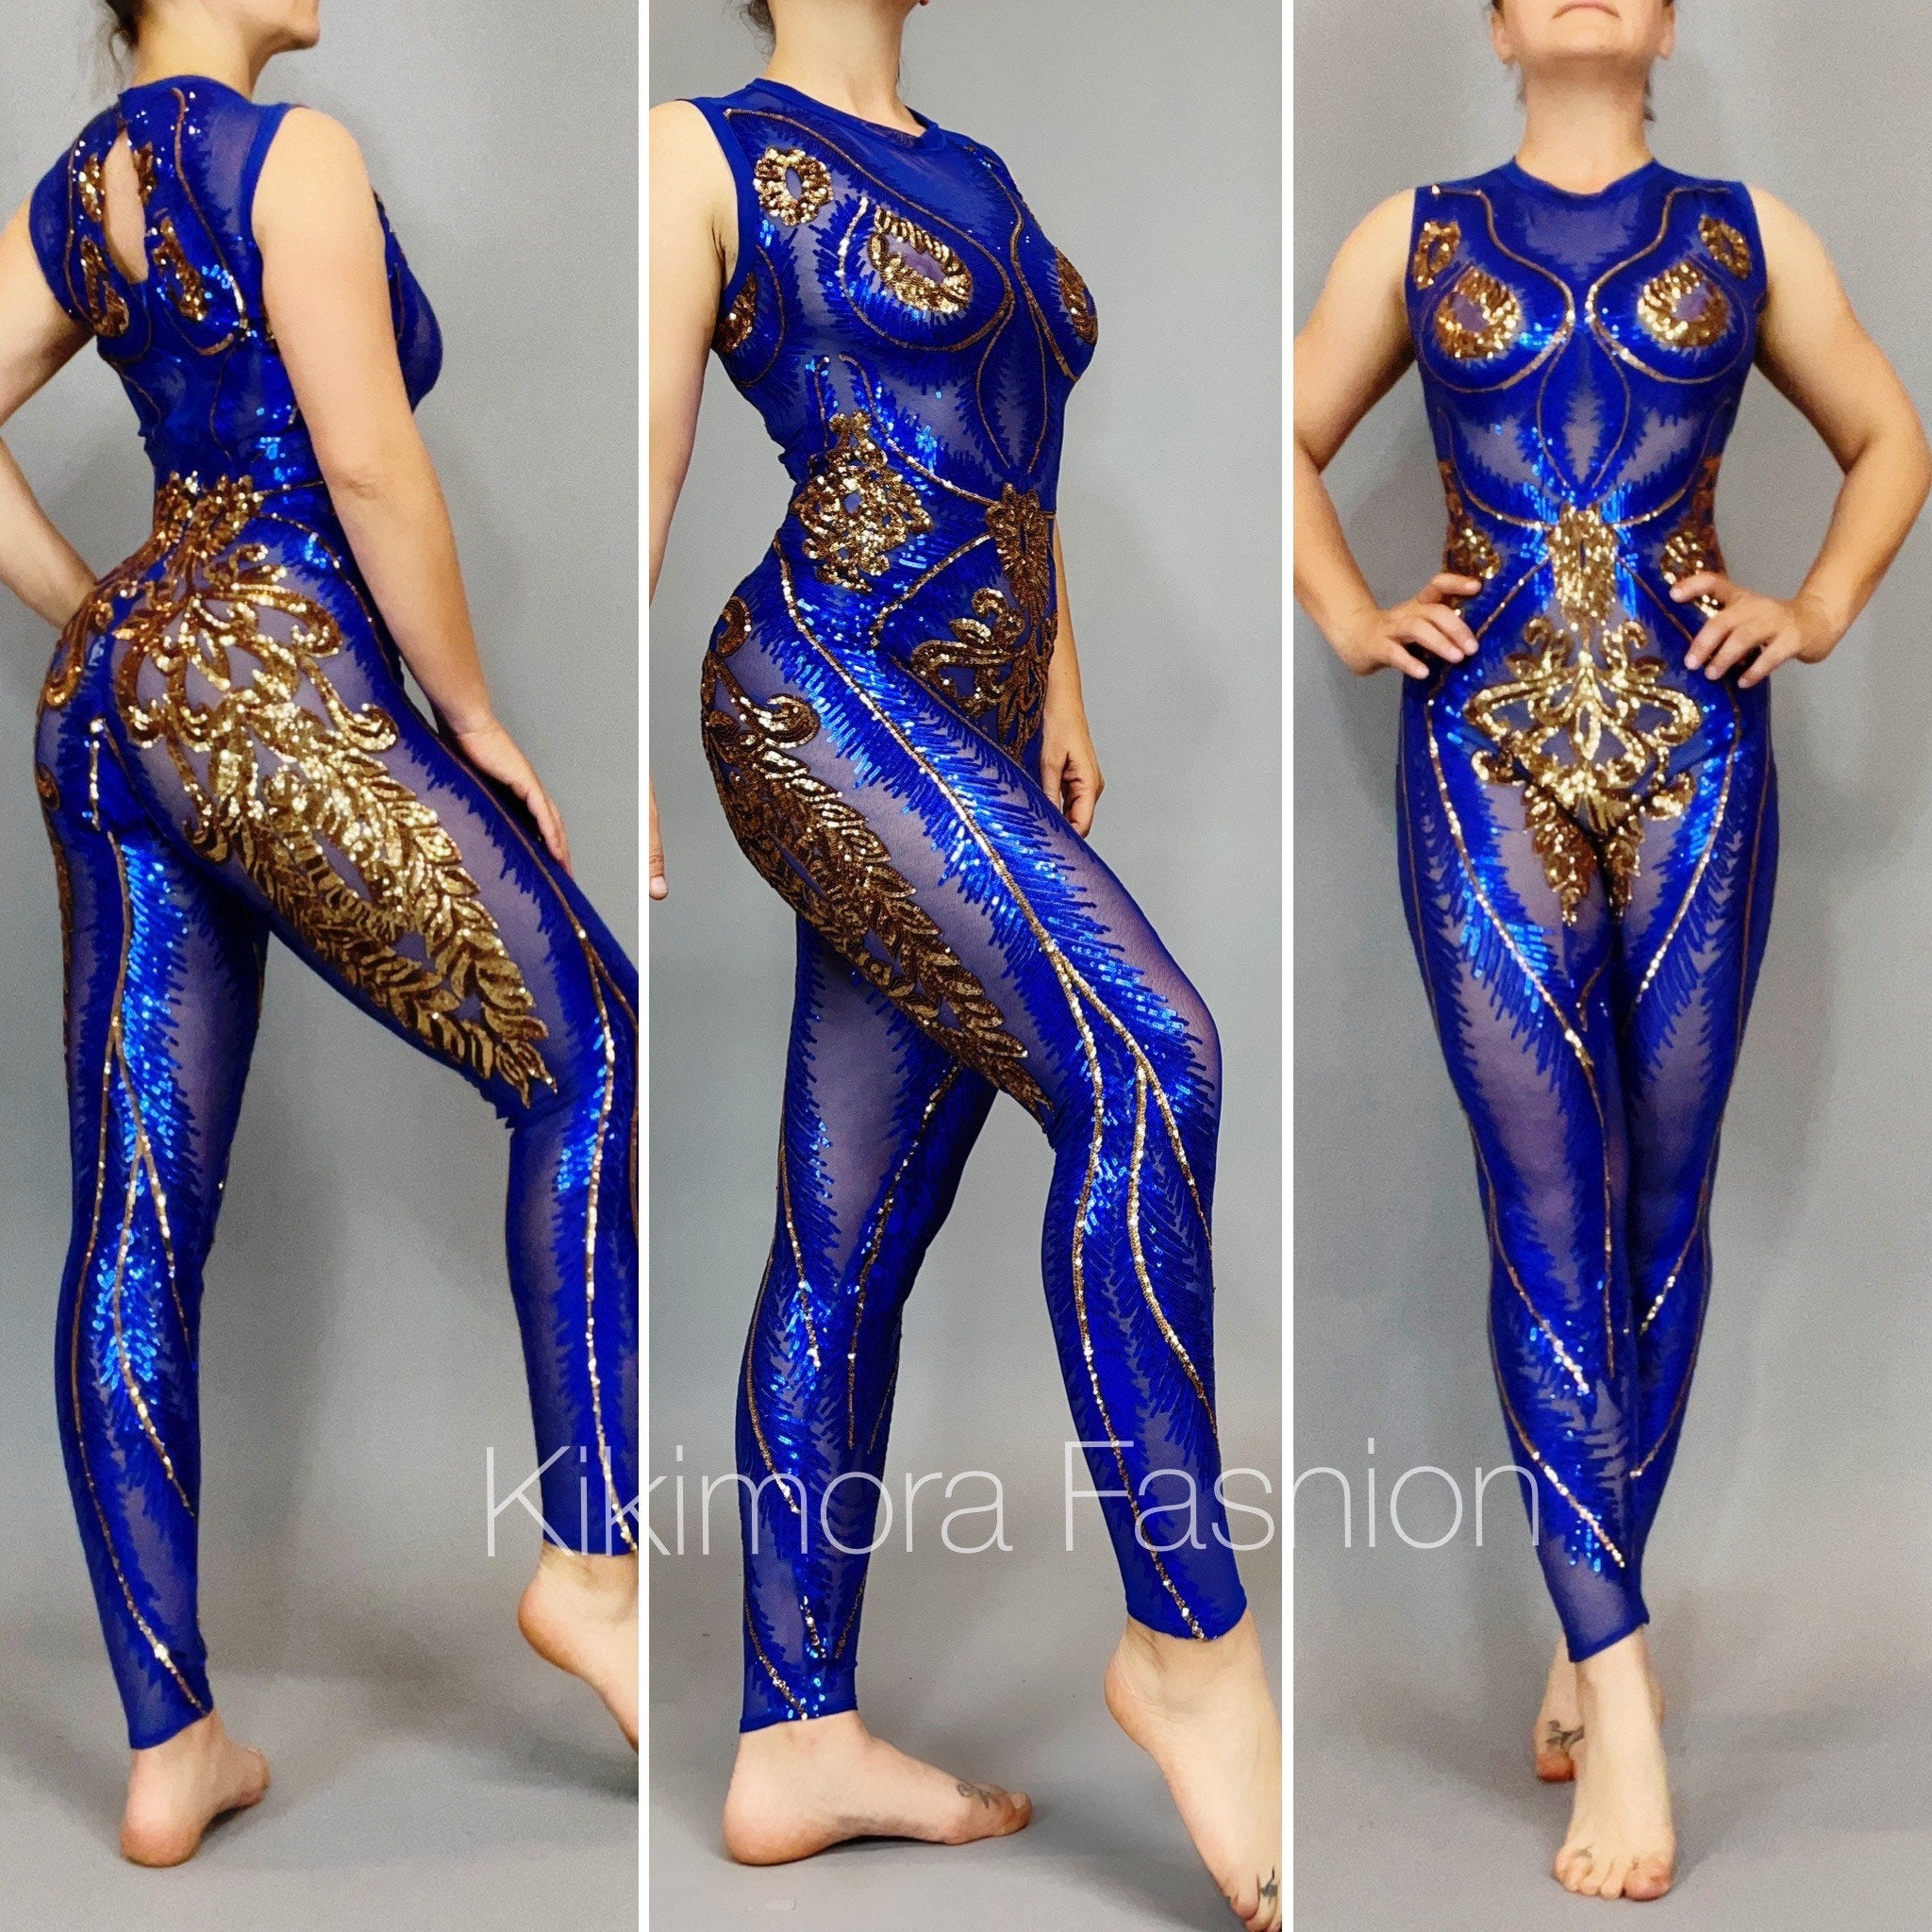 Spandex catsuit, Exotic Dance wear, Aerialist gift, Halloween outfit. –  Kikimora Fashion Store